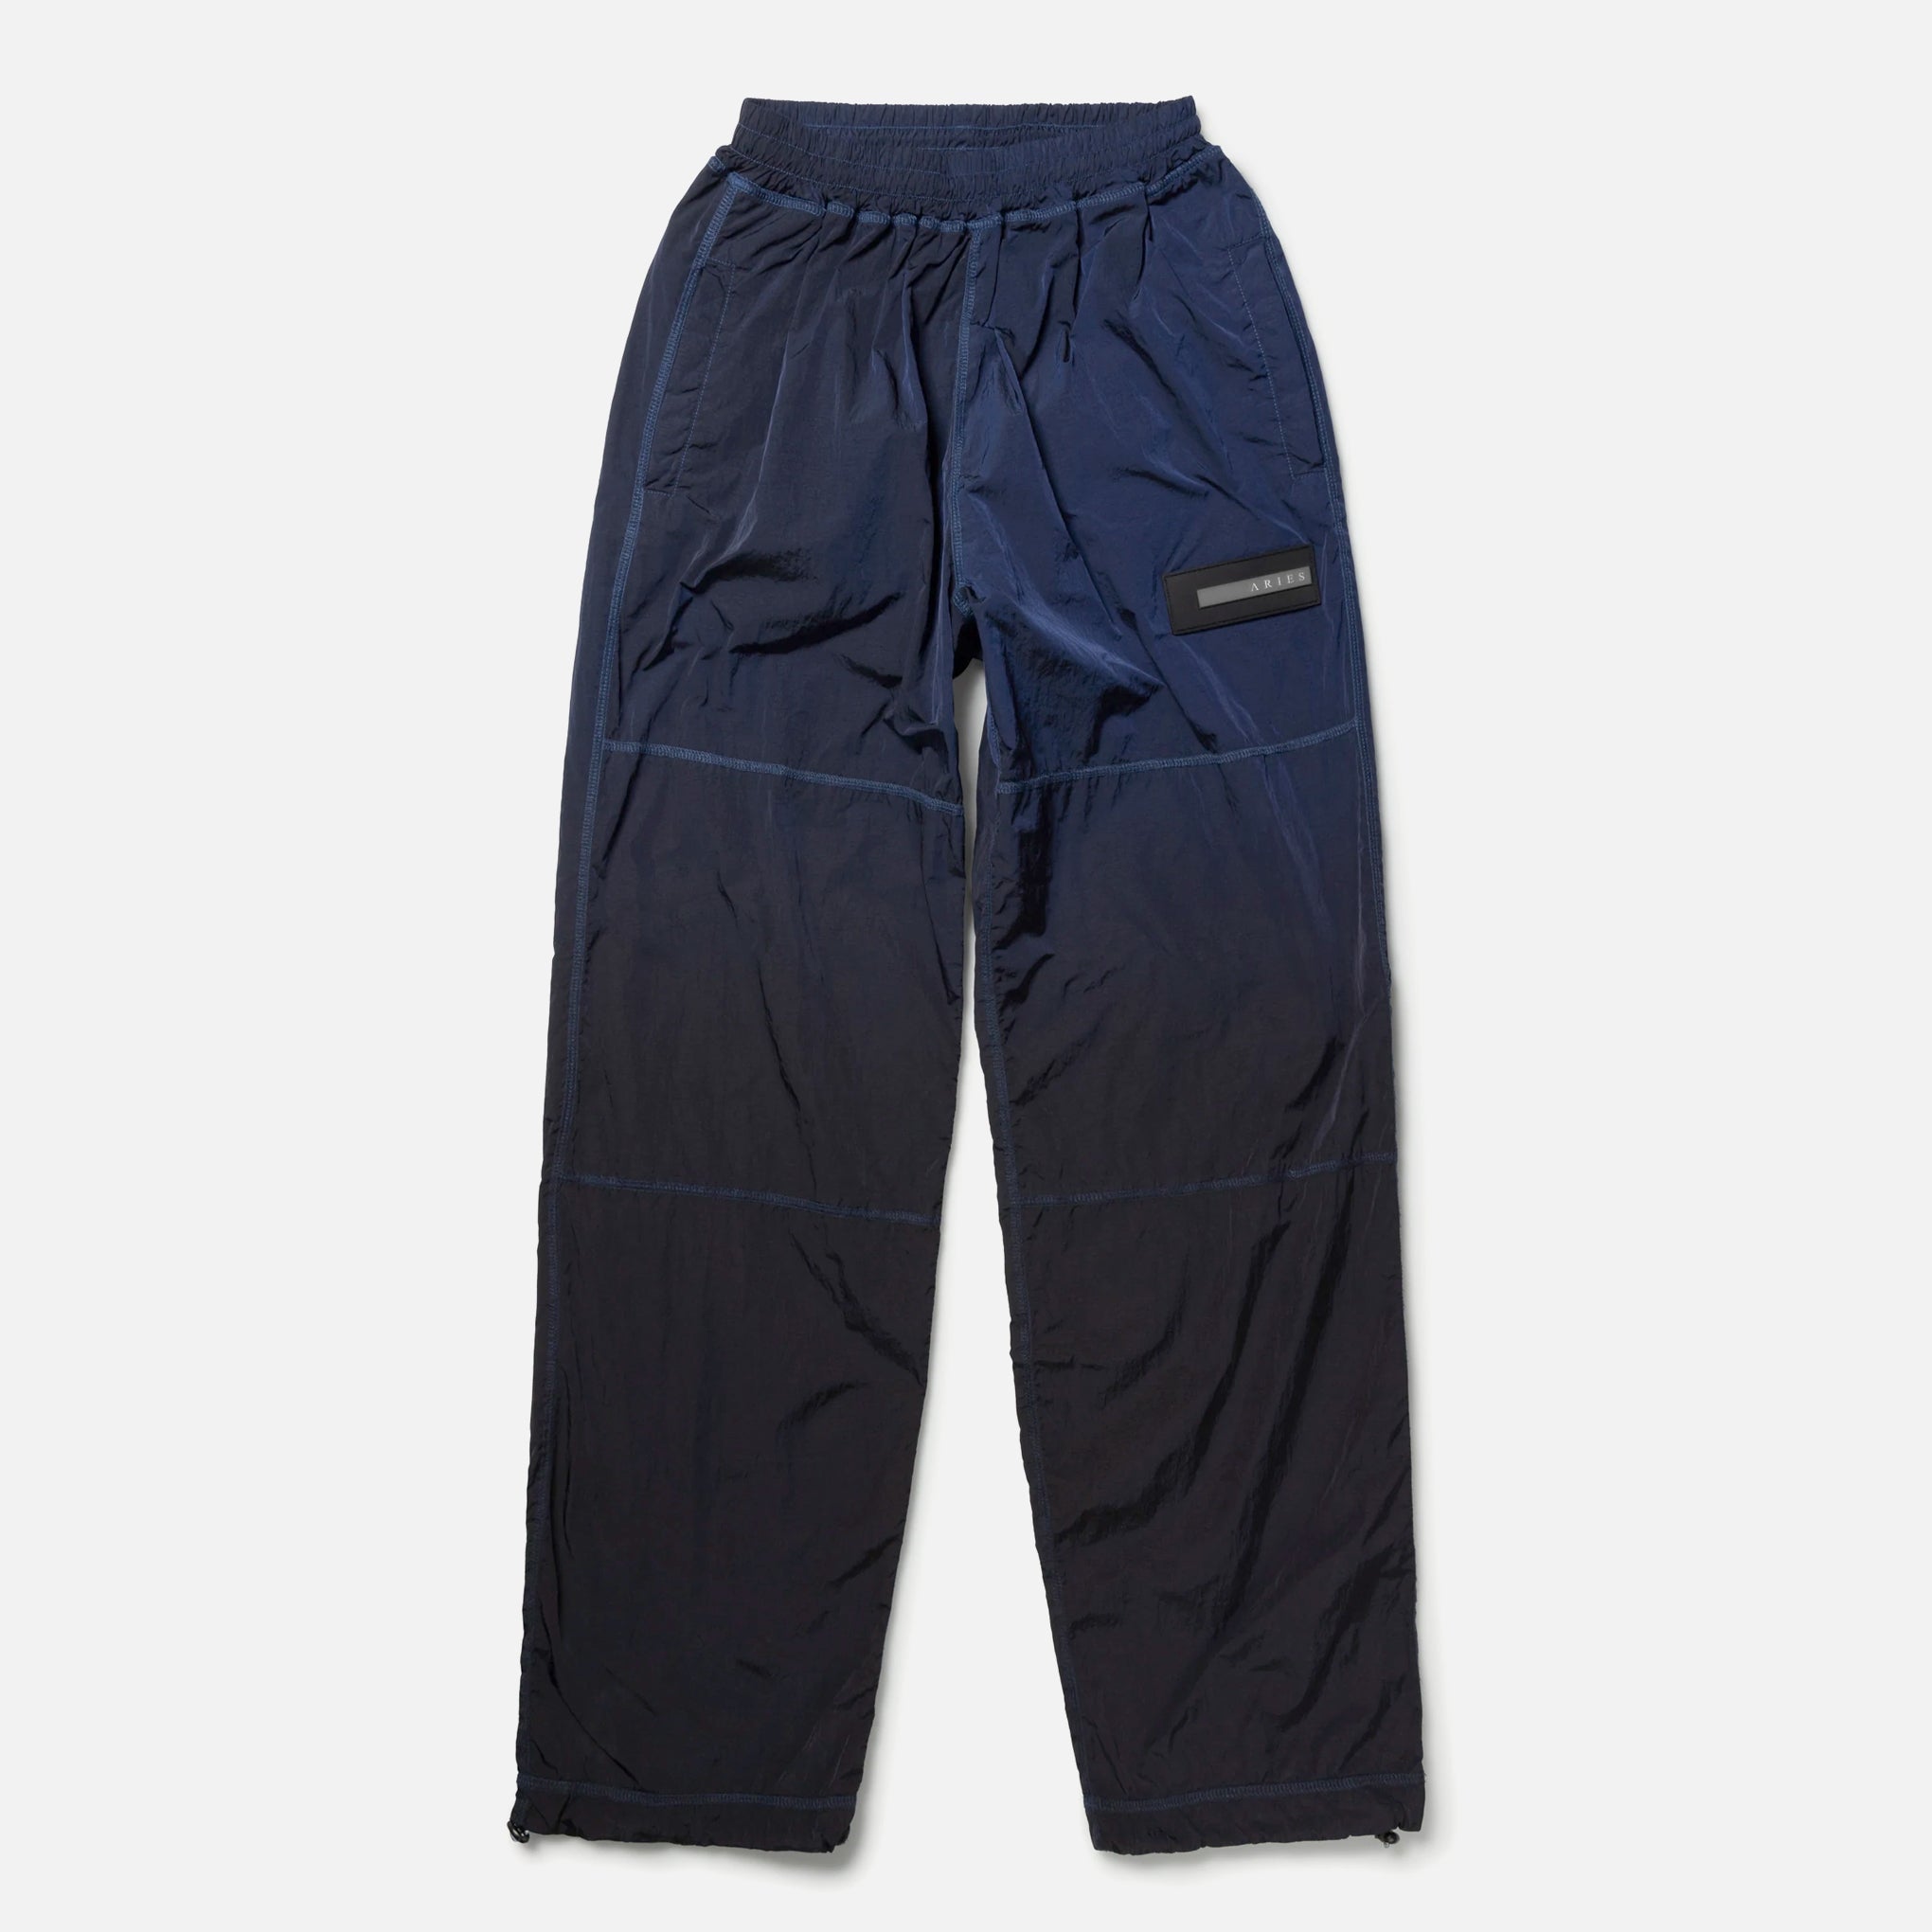 Aries Arise Spray-Dyed Windcheater Pant in Navy